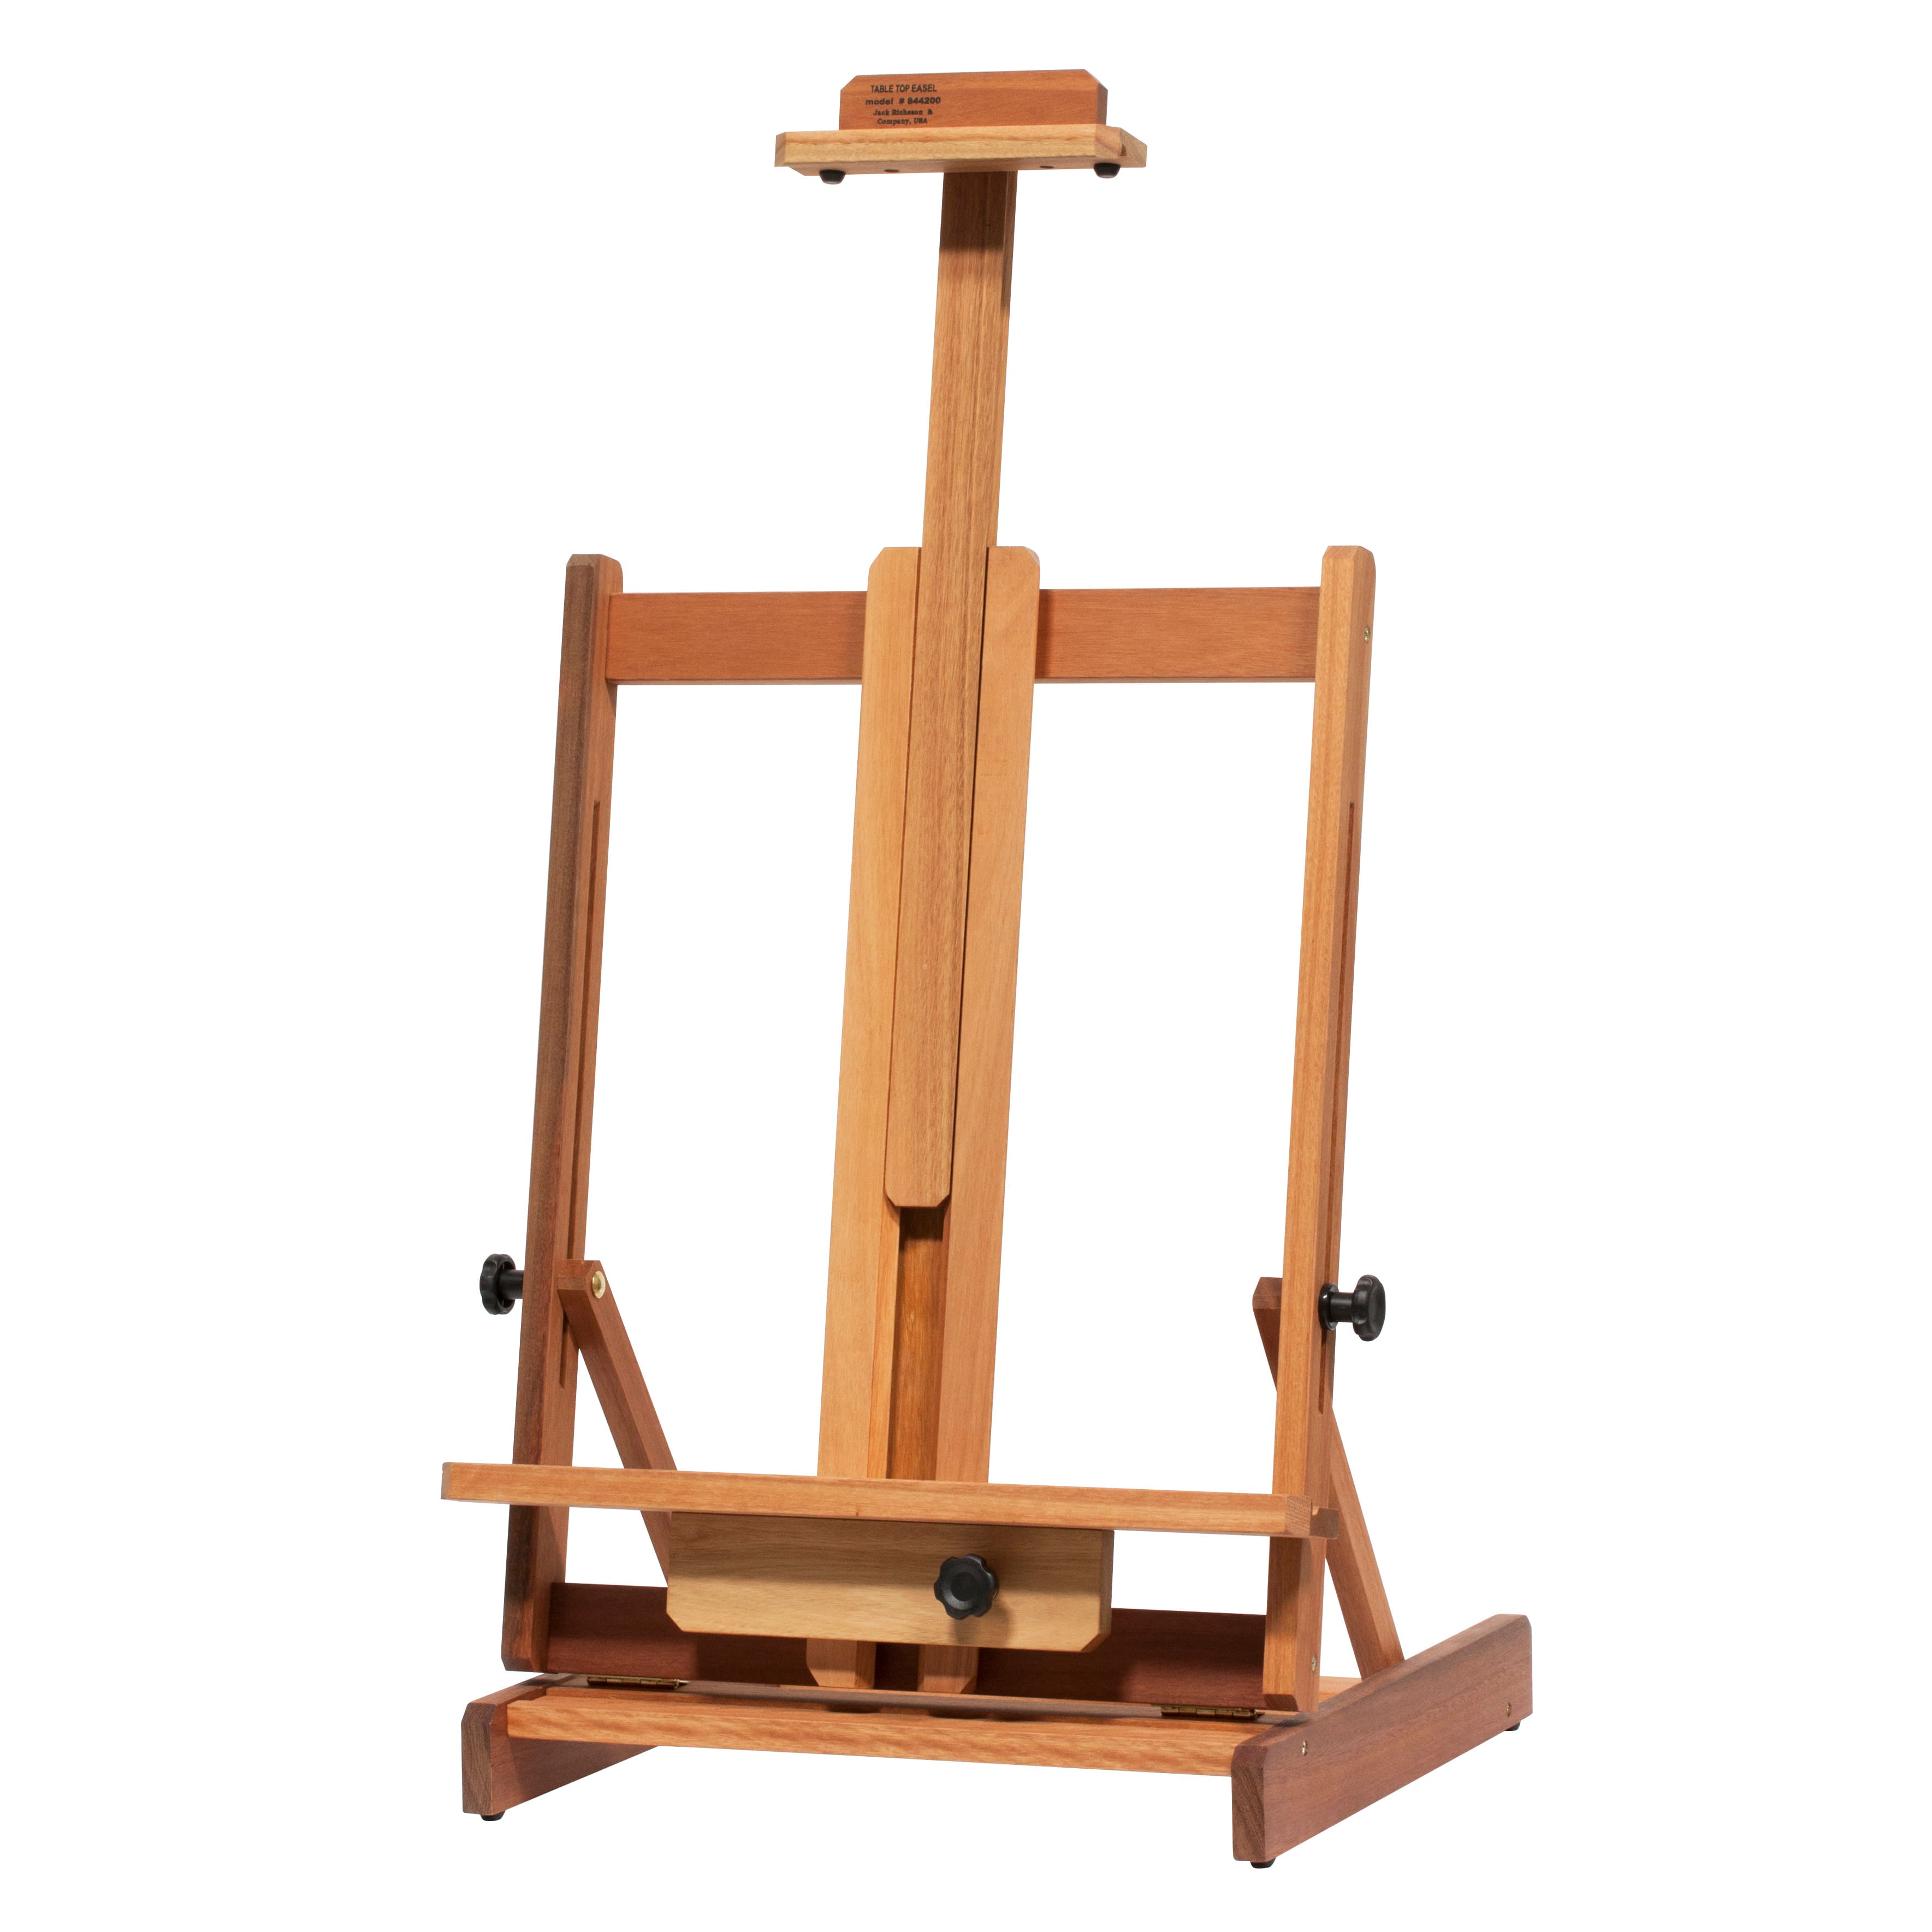 Wooden Easel Tabletop with chain